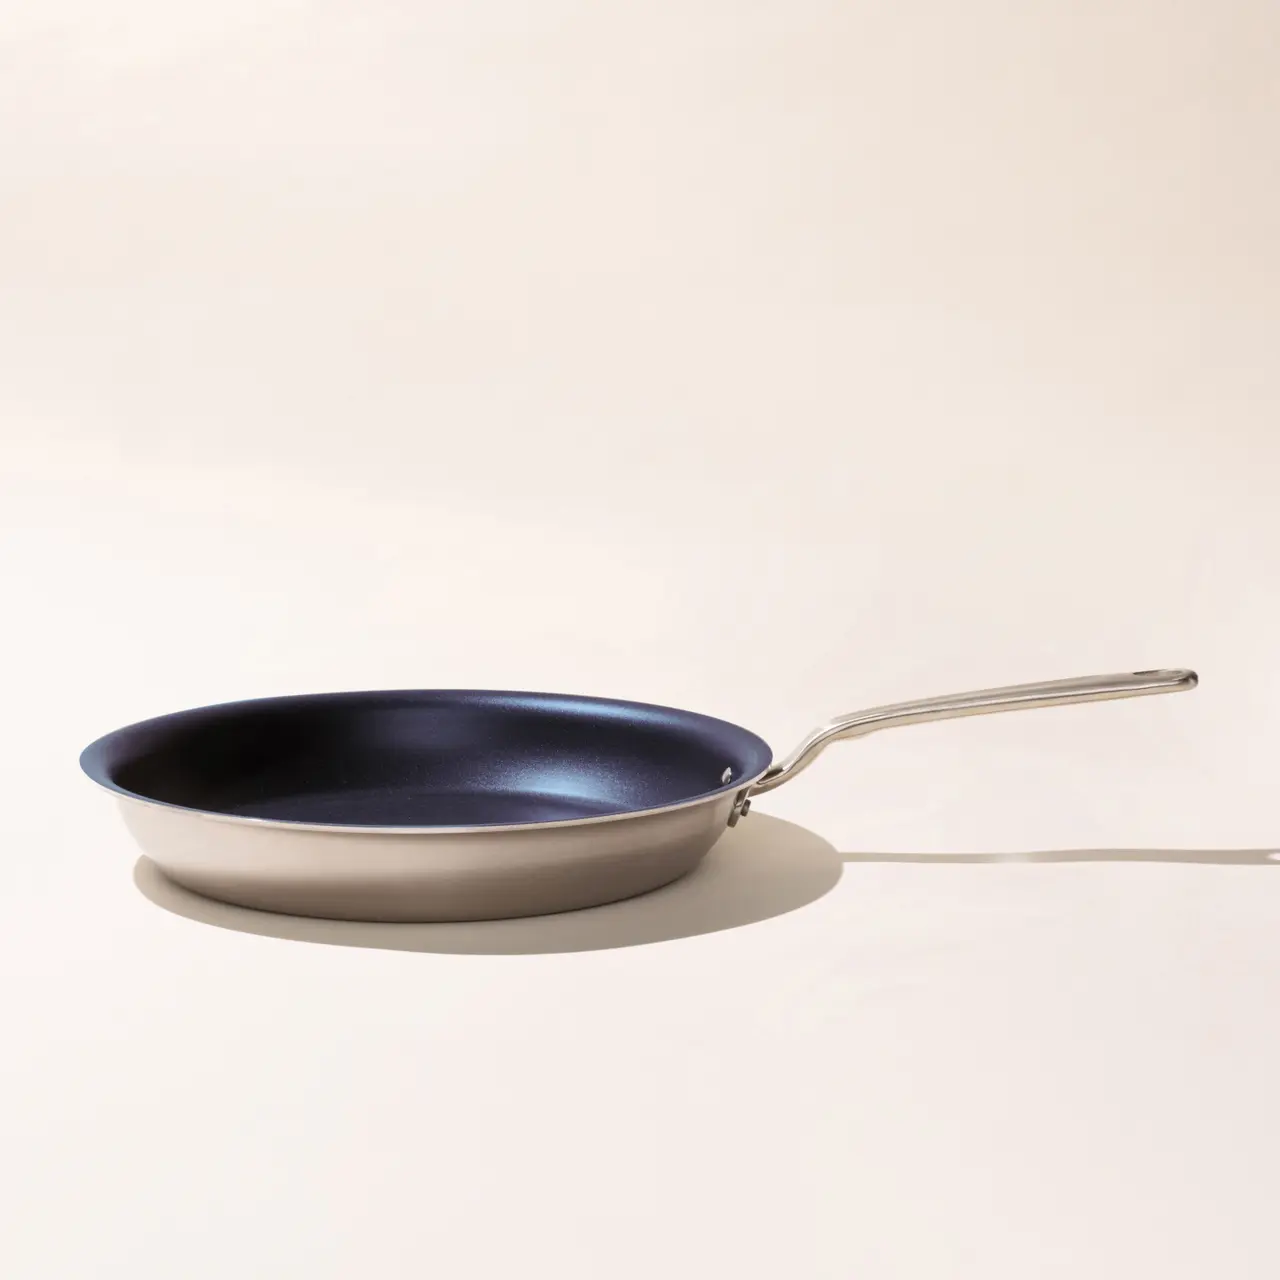 A modern frying pan with a silver handle on a light background, casting a soft shadow.